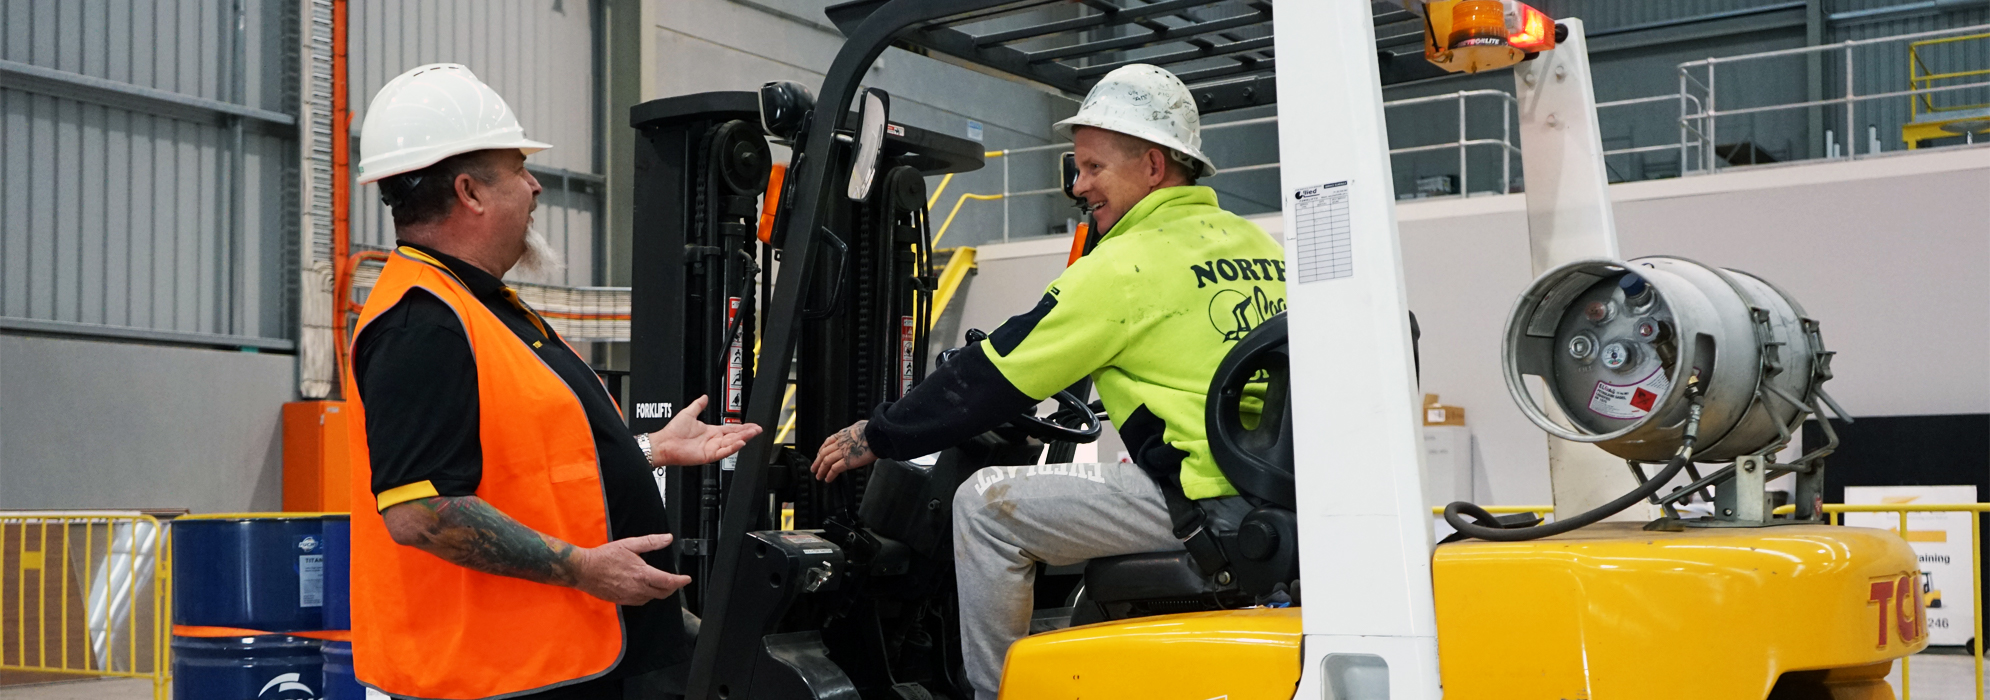 How To Get A Forklift License In Australia Faq S